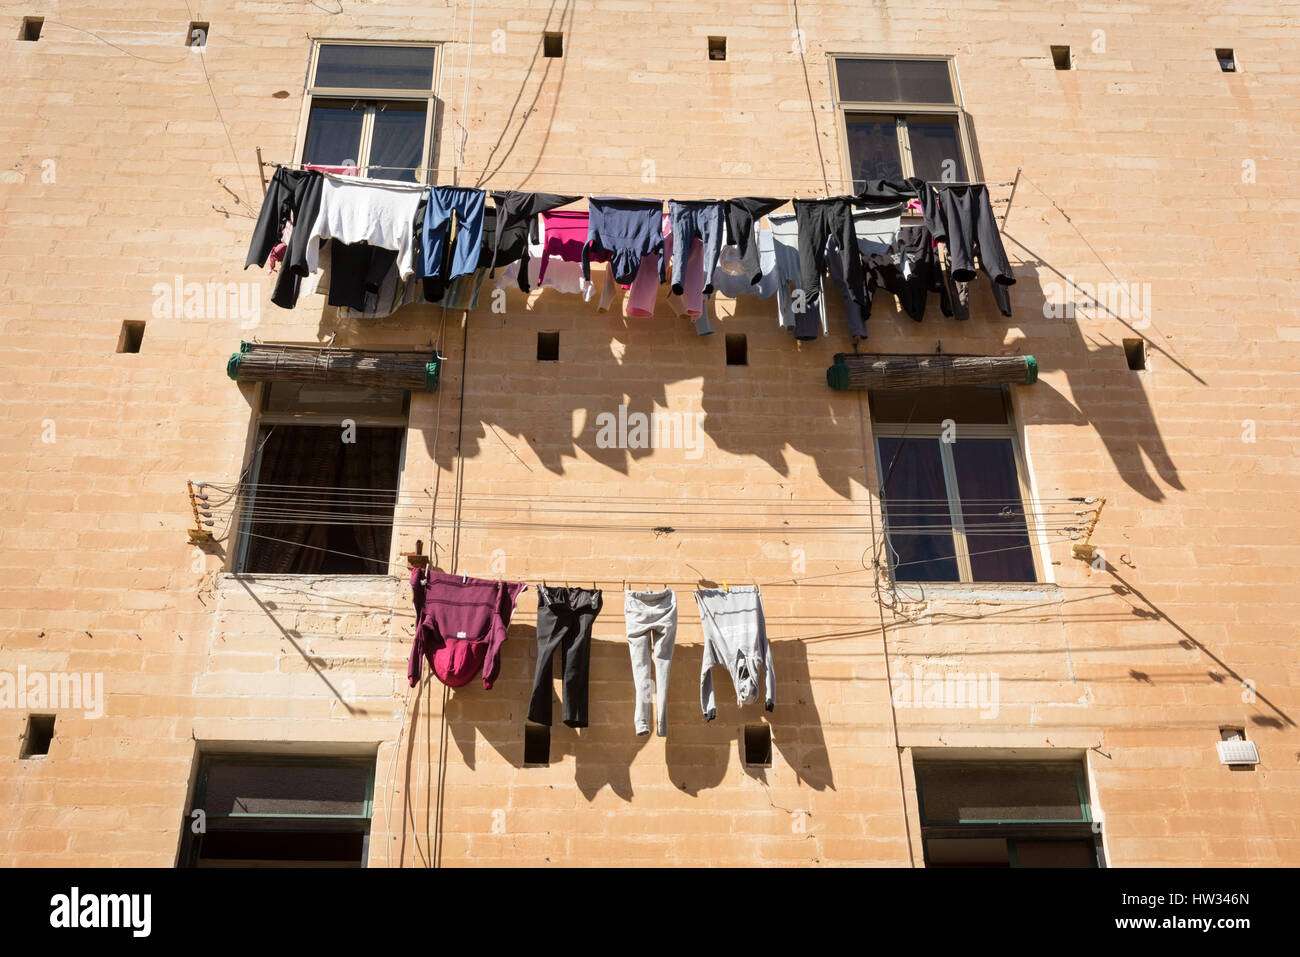 Washing and laundry hanging out to dry on washing lines on an old building in Valetta Malta Stock Photo